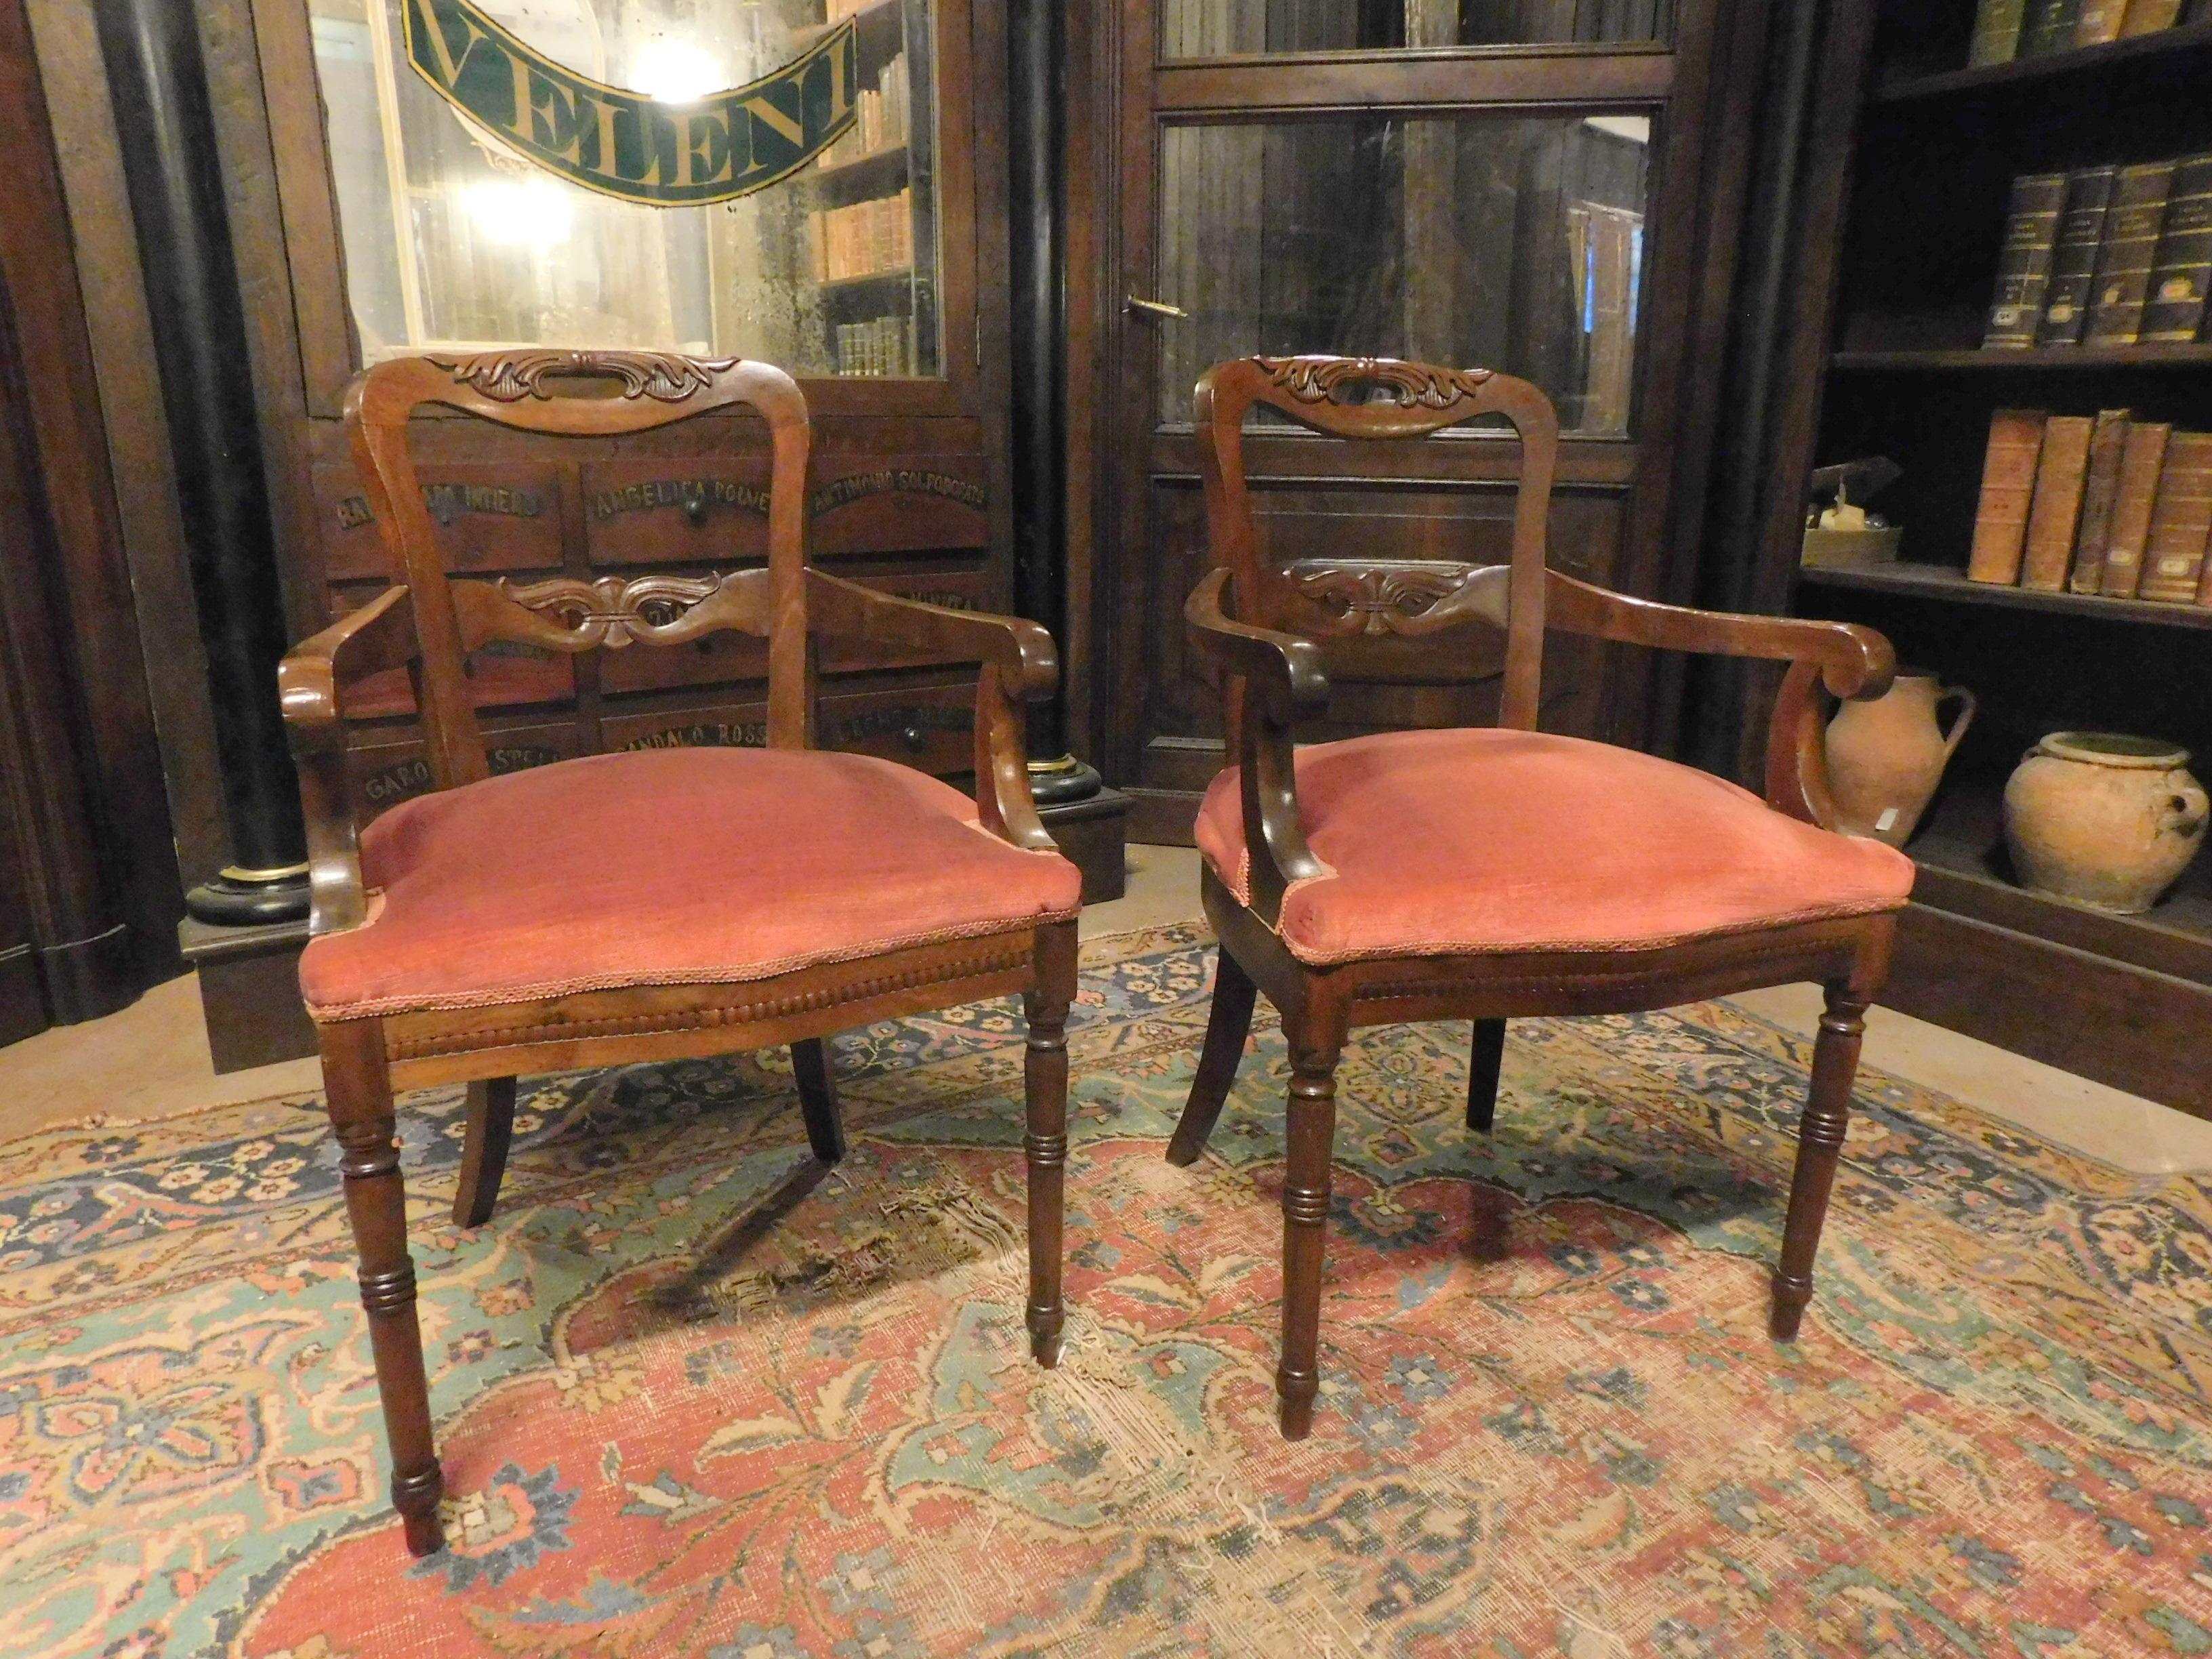 Pair of antique armchairs, chairs with carved walnut legs and red velvet padding, built in the 19th century for a residence in Turin, Italy.
They measure cm w 55 x h 85 (h seat cm 50) x d 50 each.